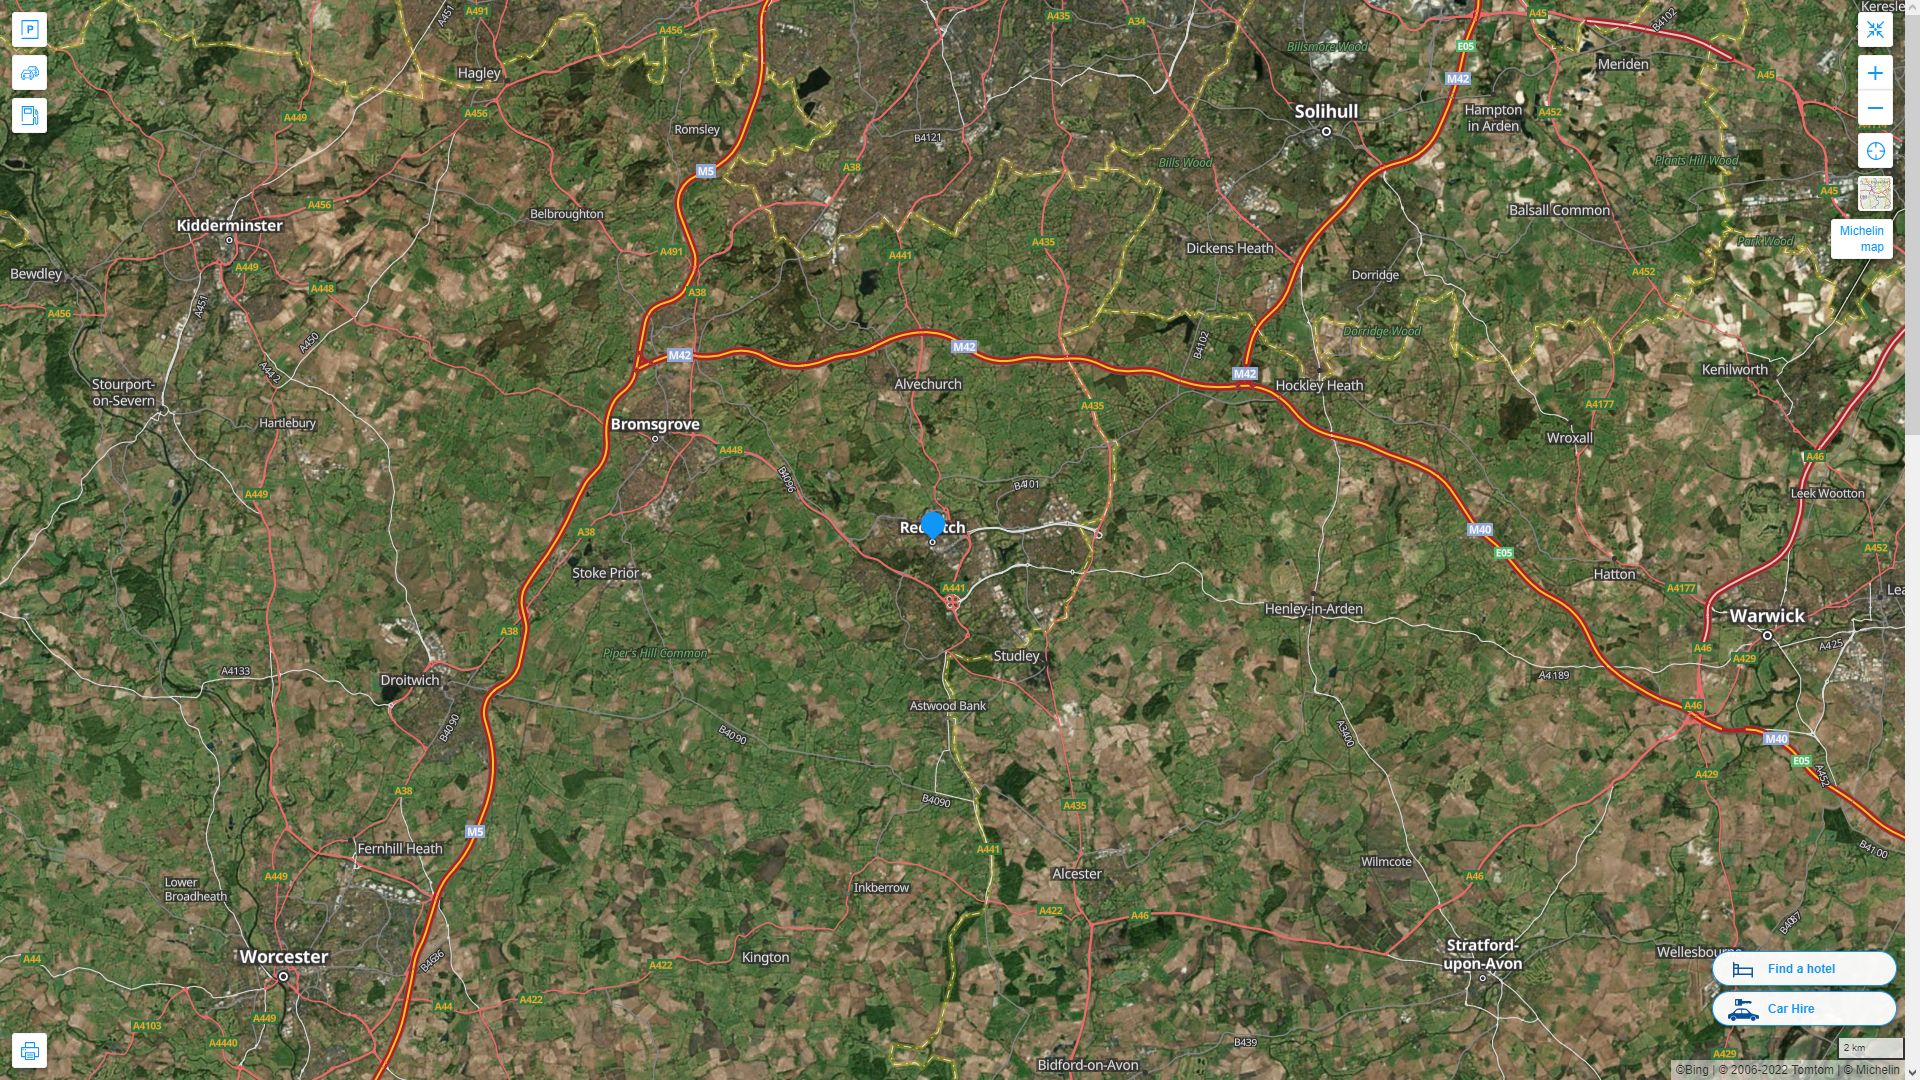 Redditch Highway and Road Map with Satellite View